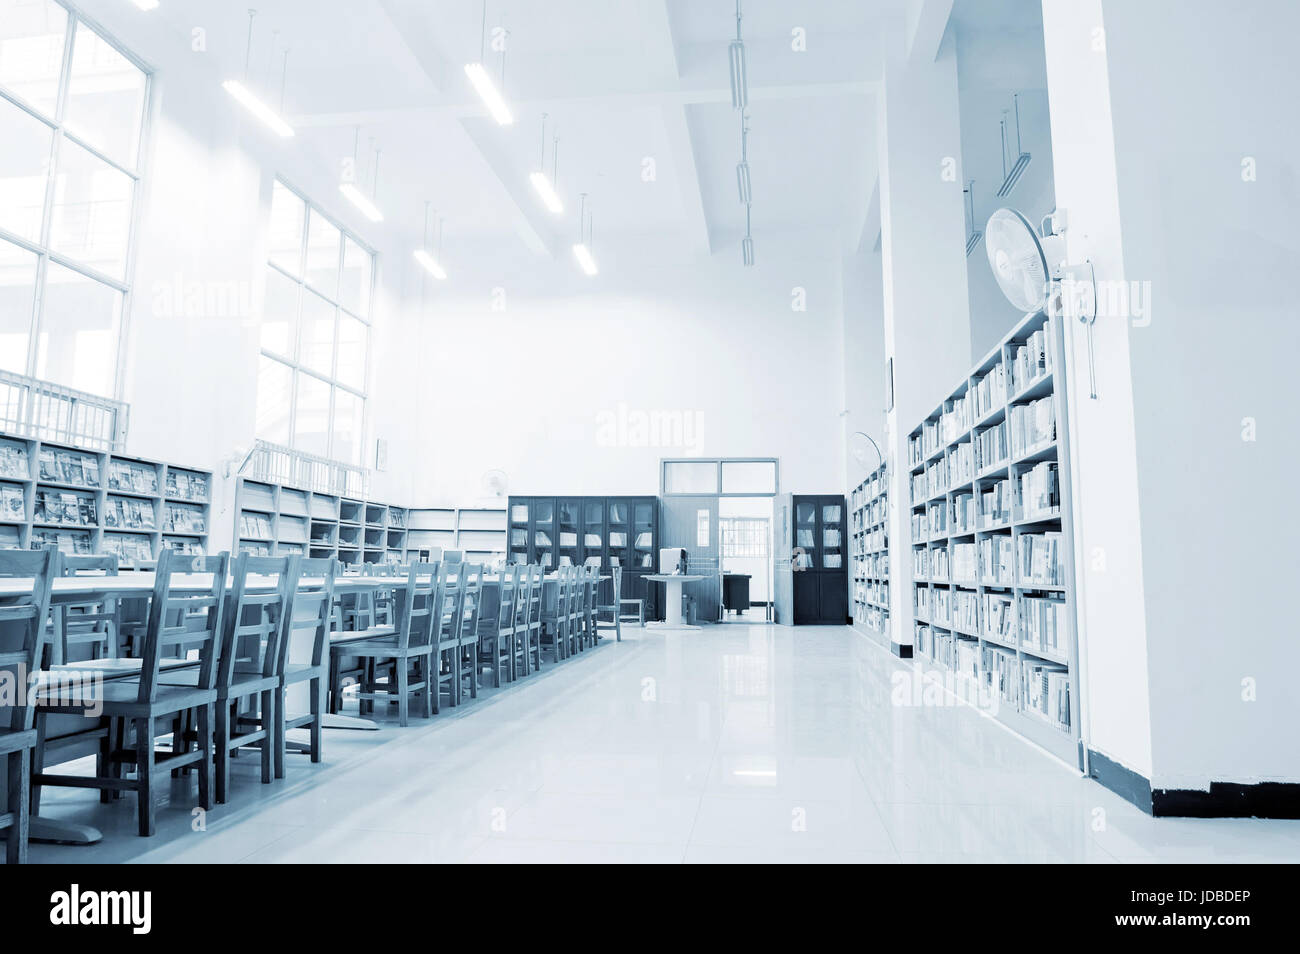 Library shelves, a large number of books. Stock Photo